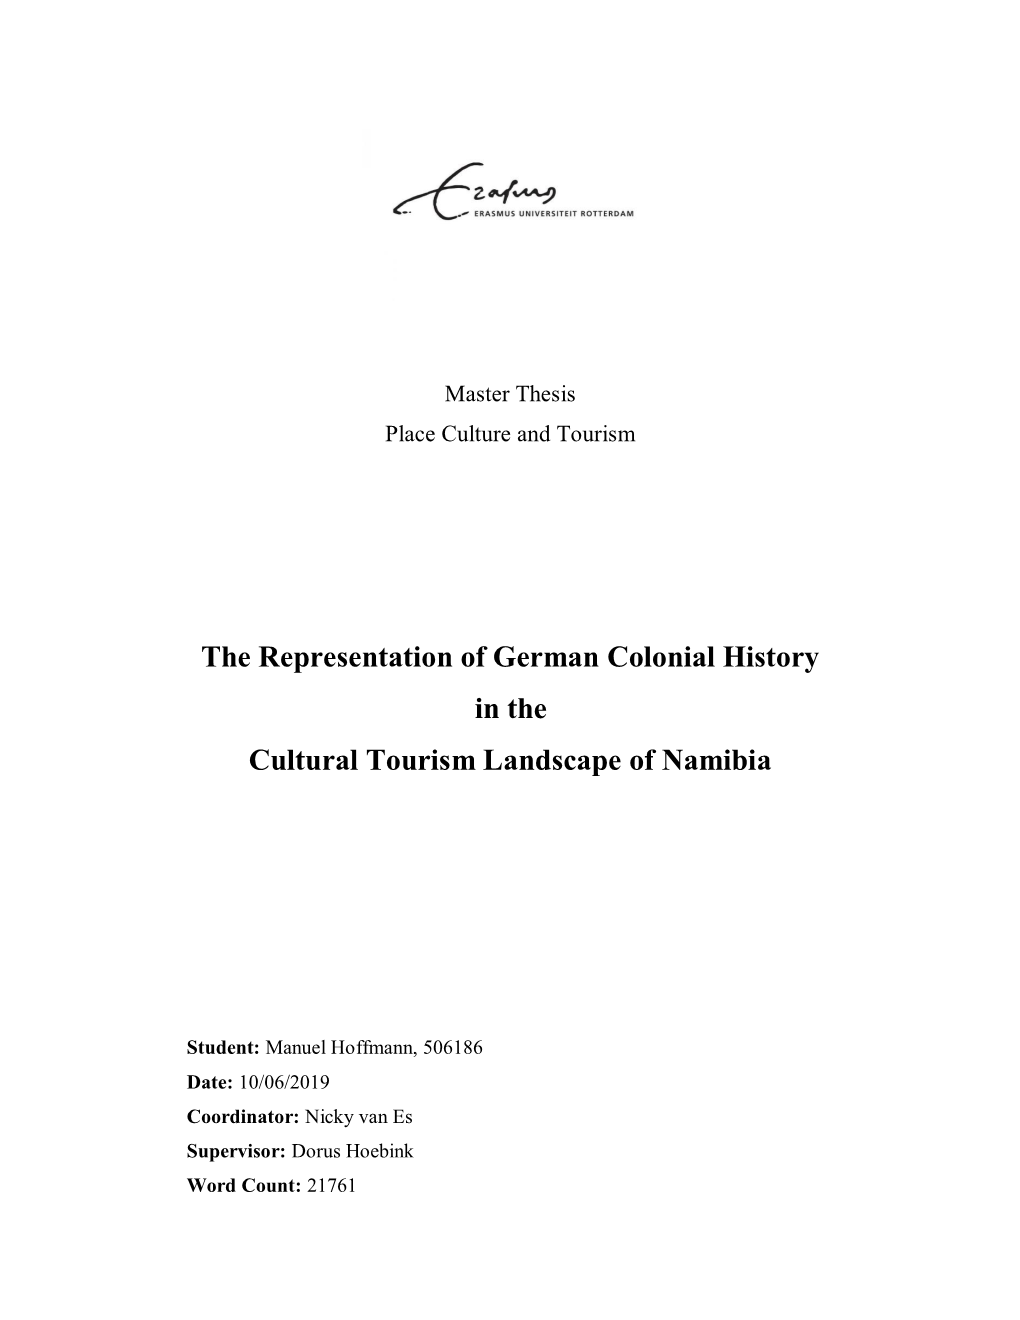 The Representation of German Colonial History in the Cultural Tourism Landscape of Namibia